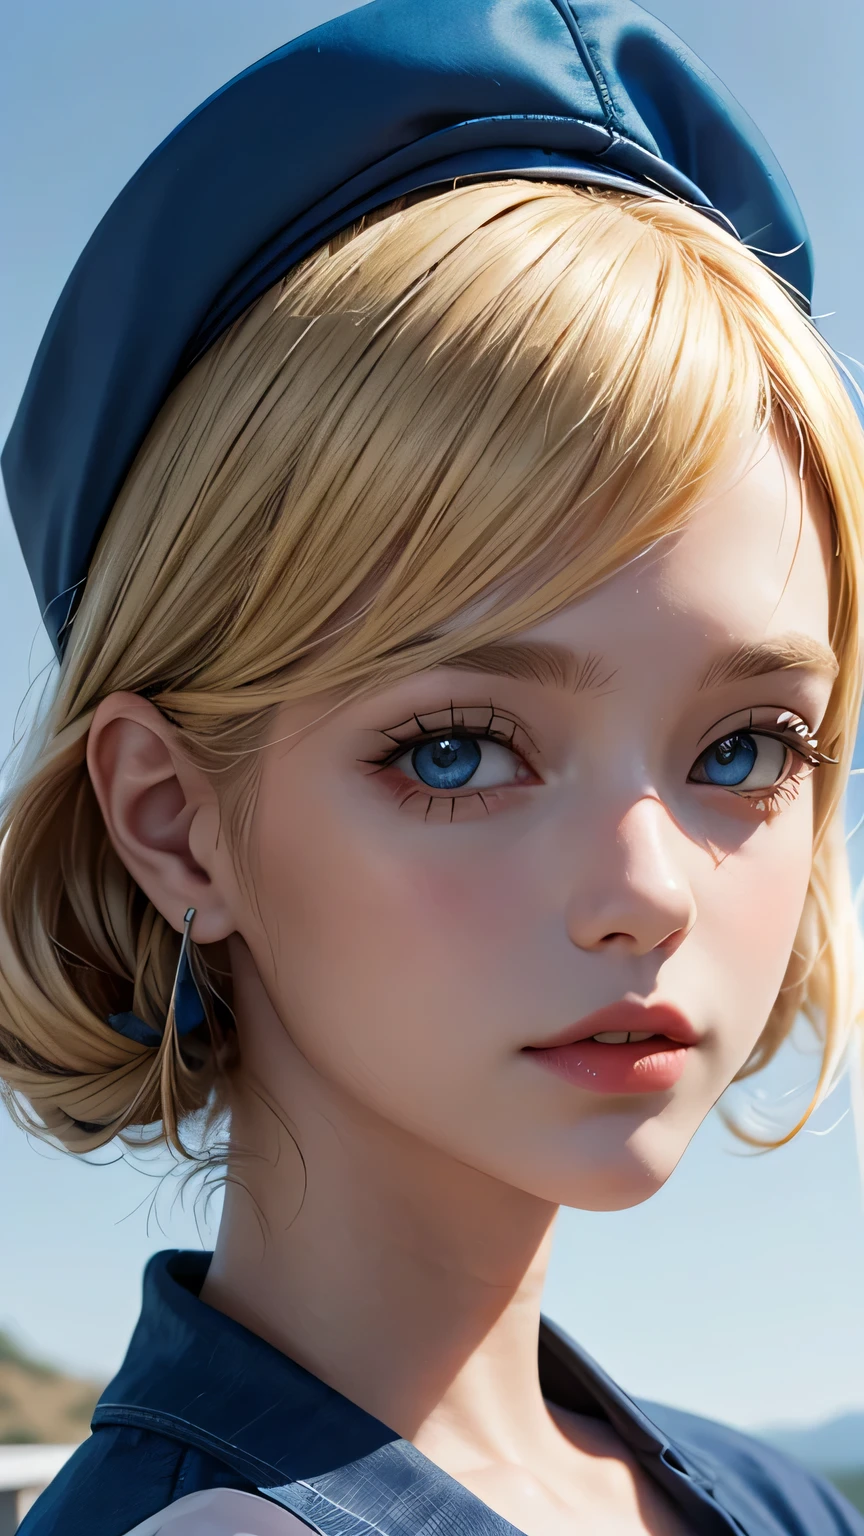 a portrait of a blonde girl with blue cap and blue shirt